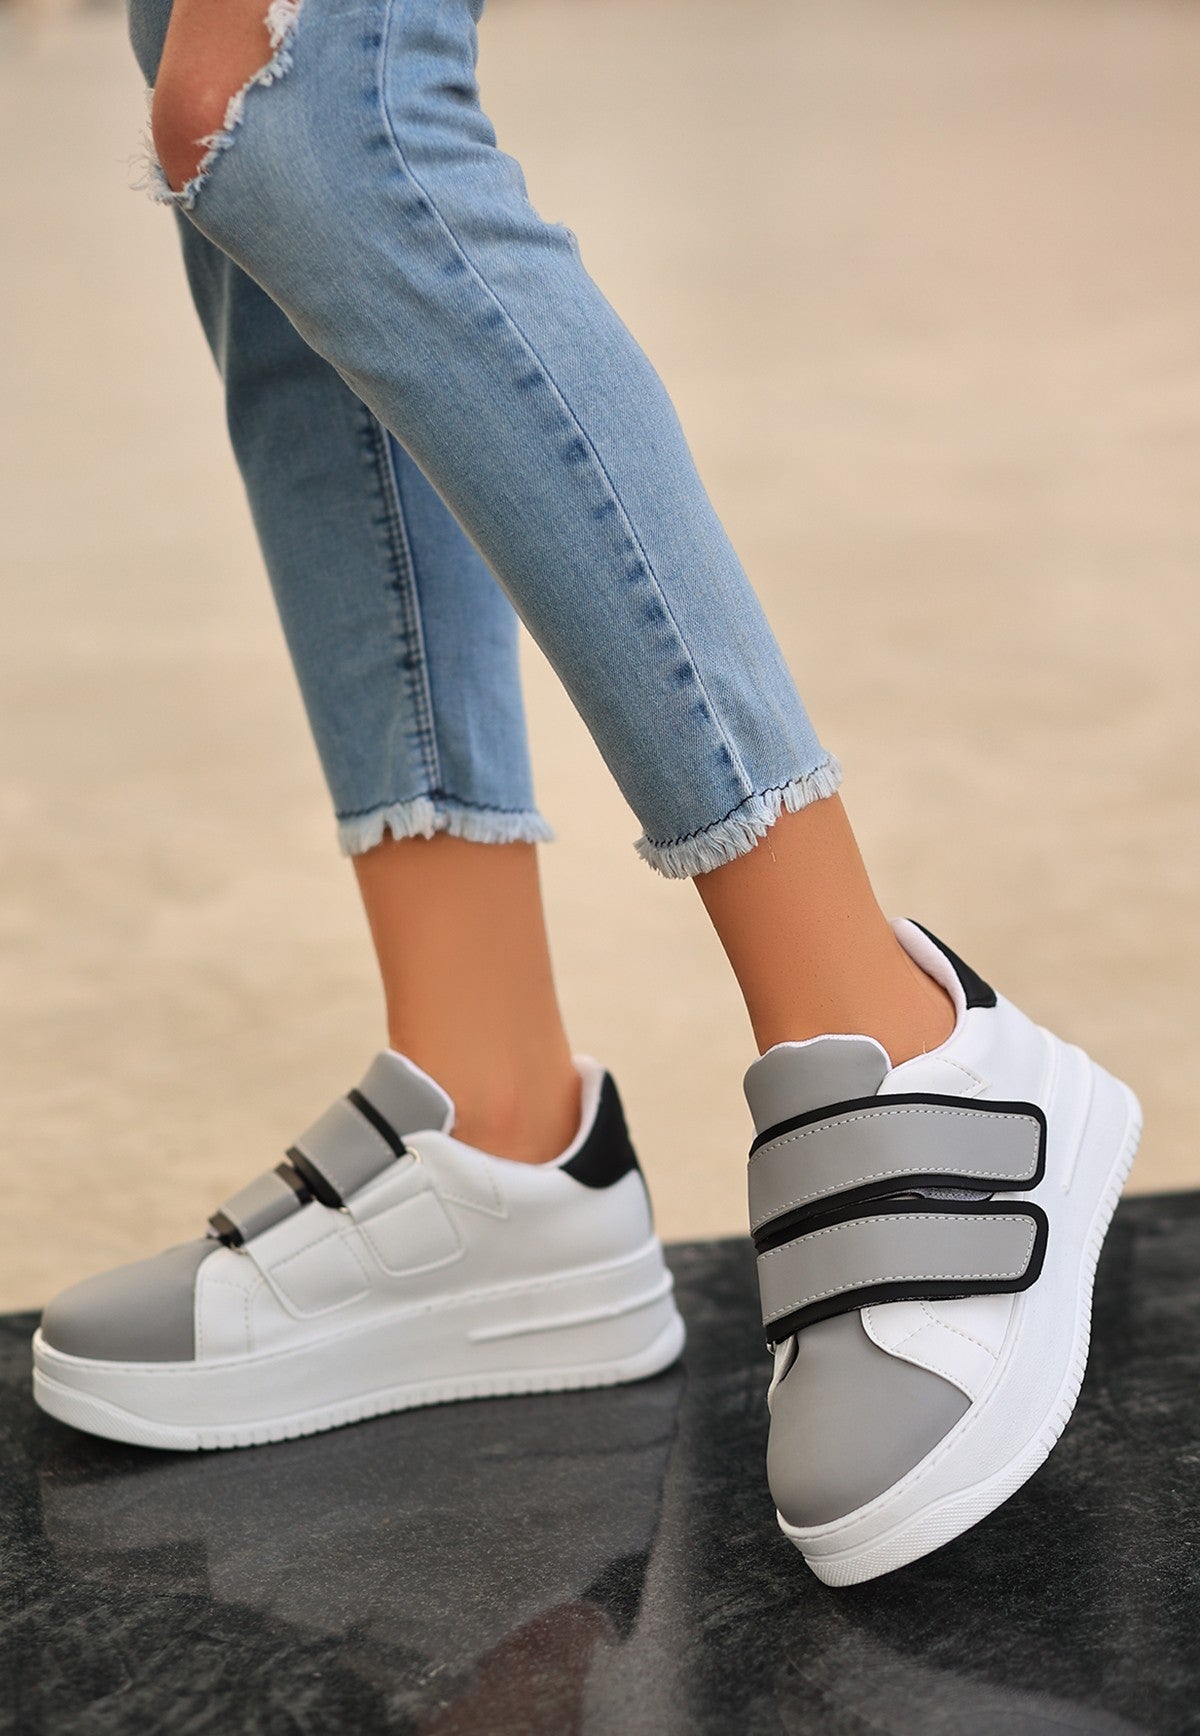 Women's Marx White Skin Gray Detailed Sneakers Shoes - STREETMODE ™